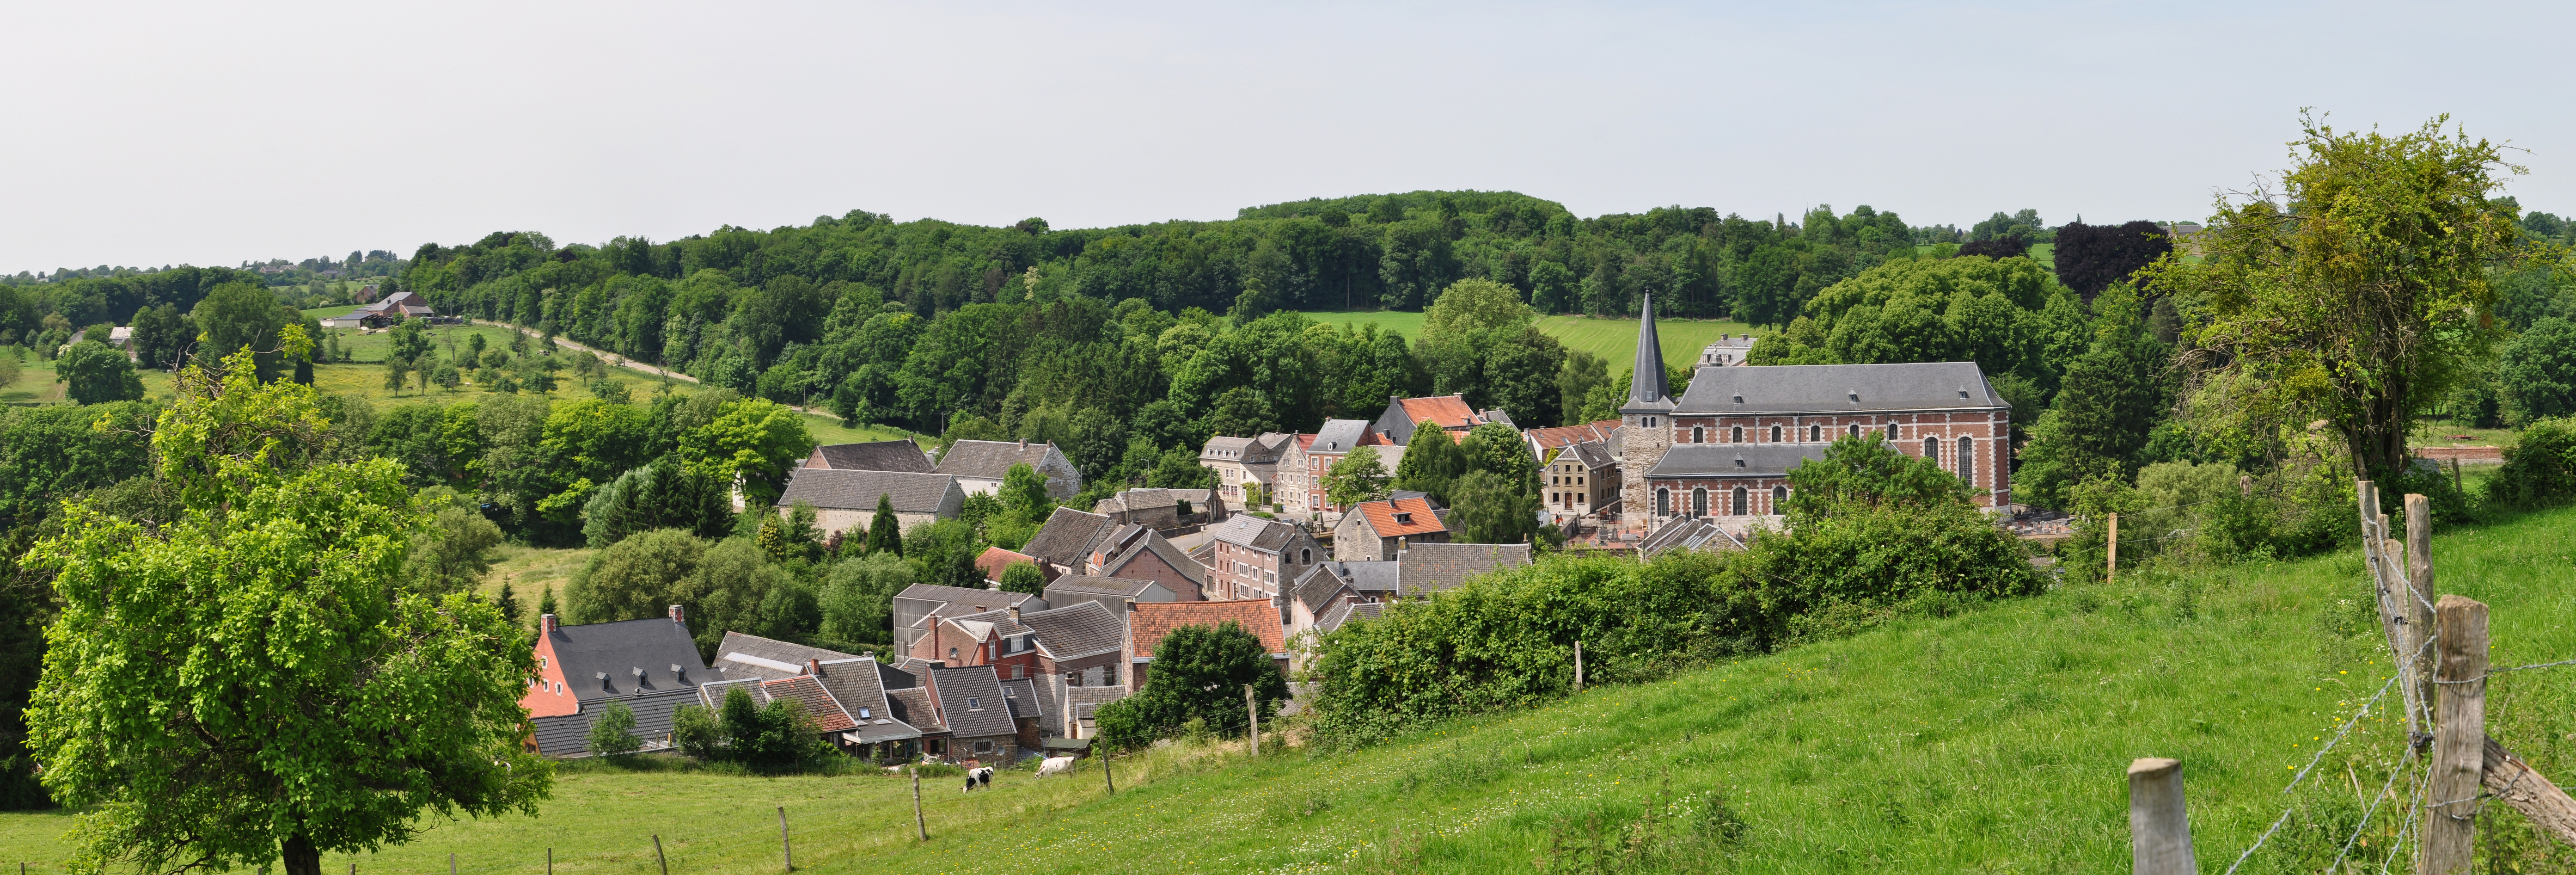 View of Soiron in the province of Liege. One of the Beautiful Villages of Wallonia.